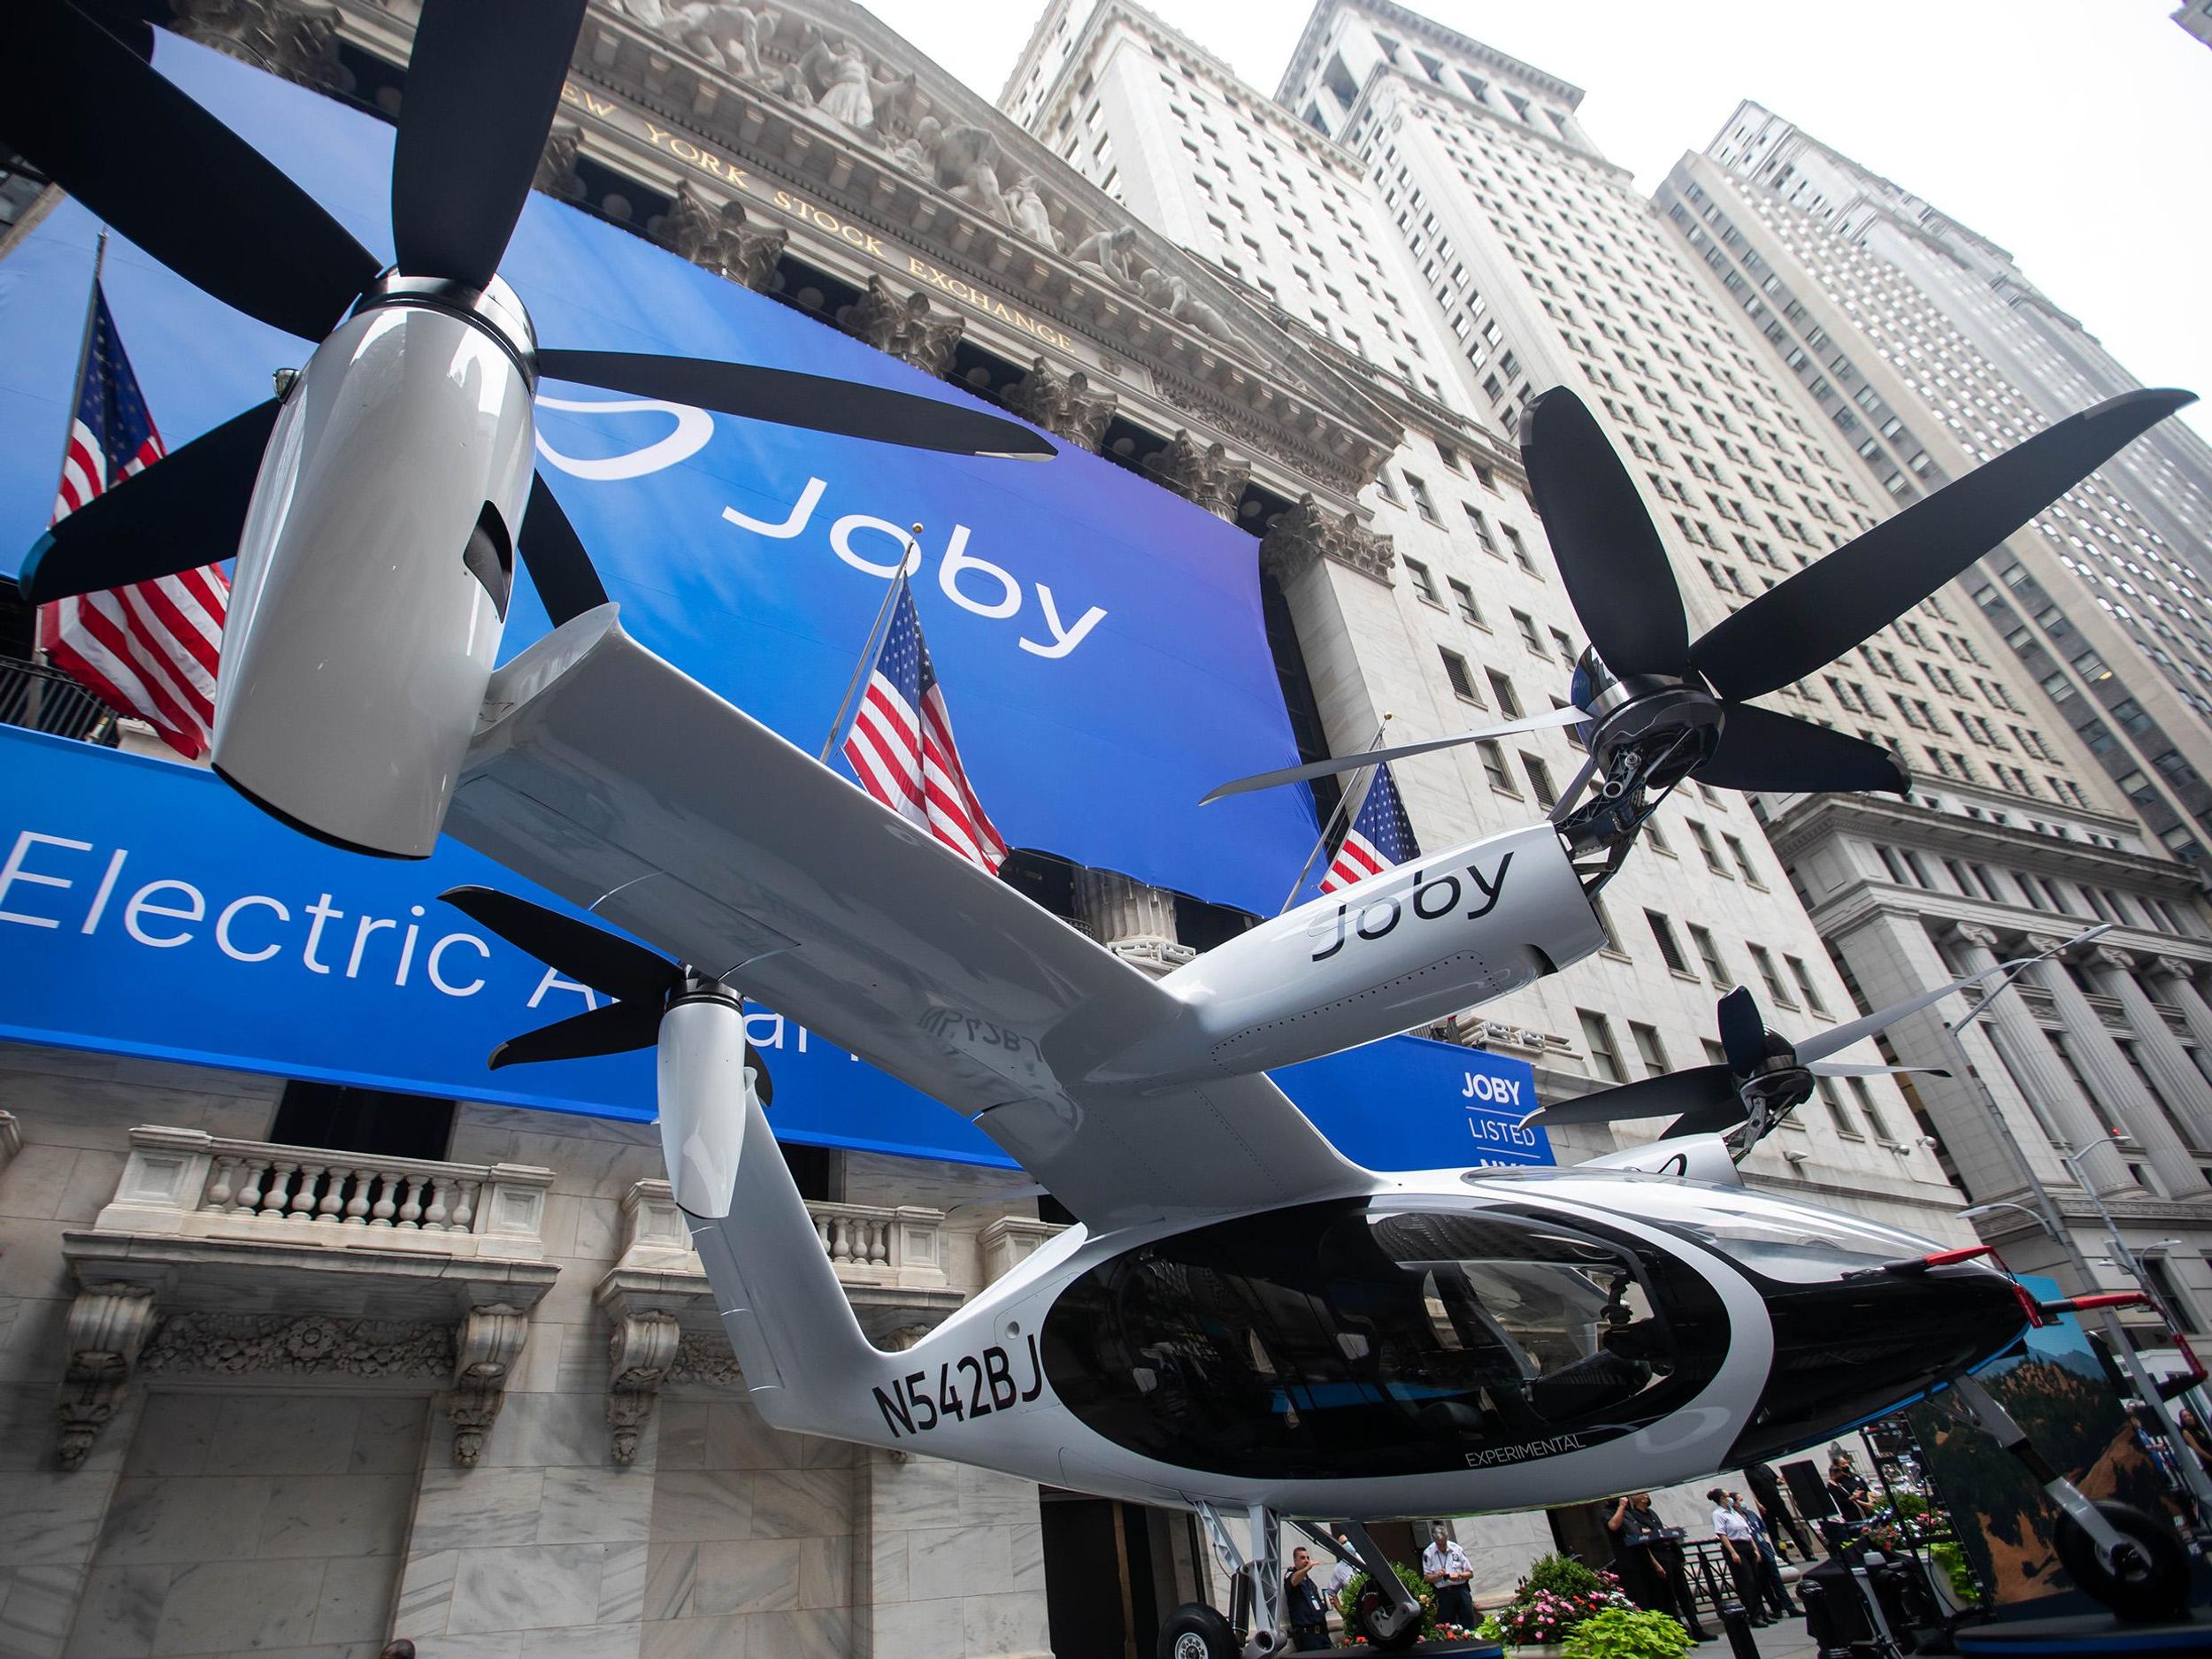 A Joby Aviation Inc. electric vertical take-off and landing aircraft outside the New York Stock Exchange.